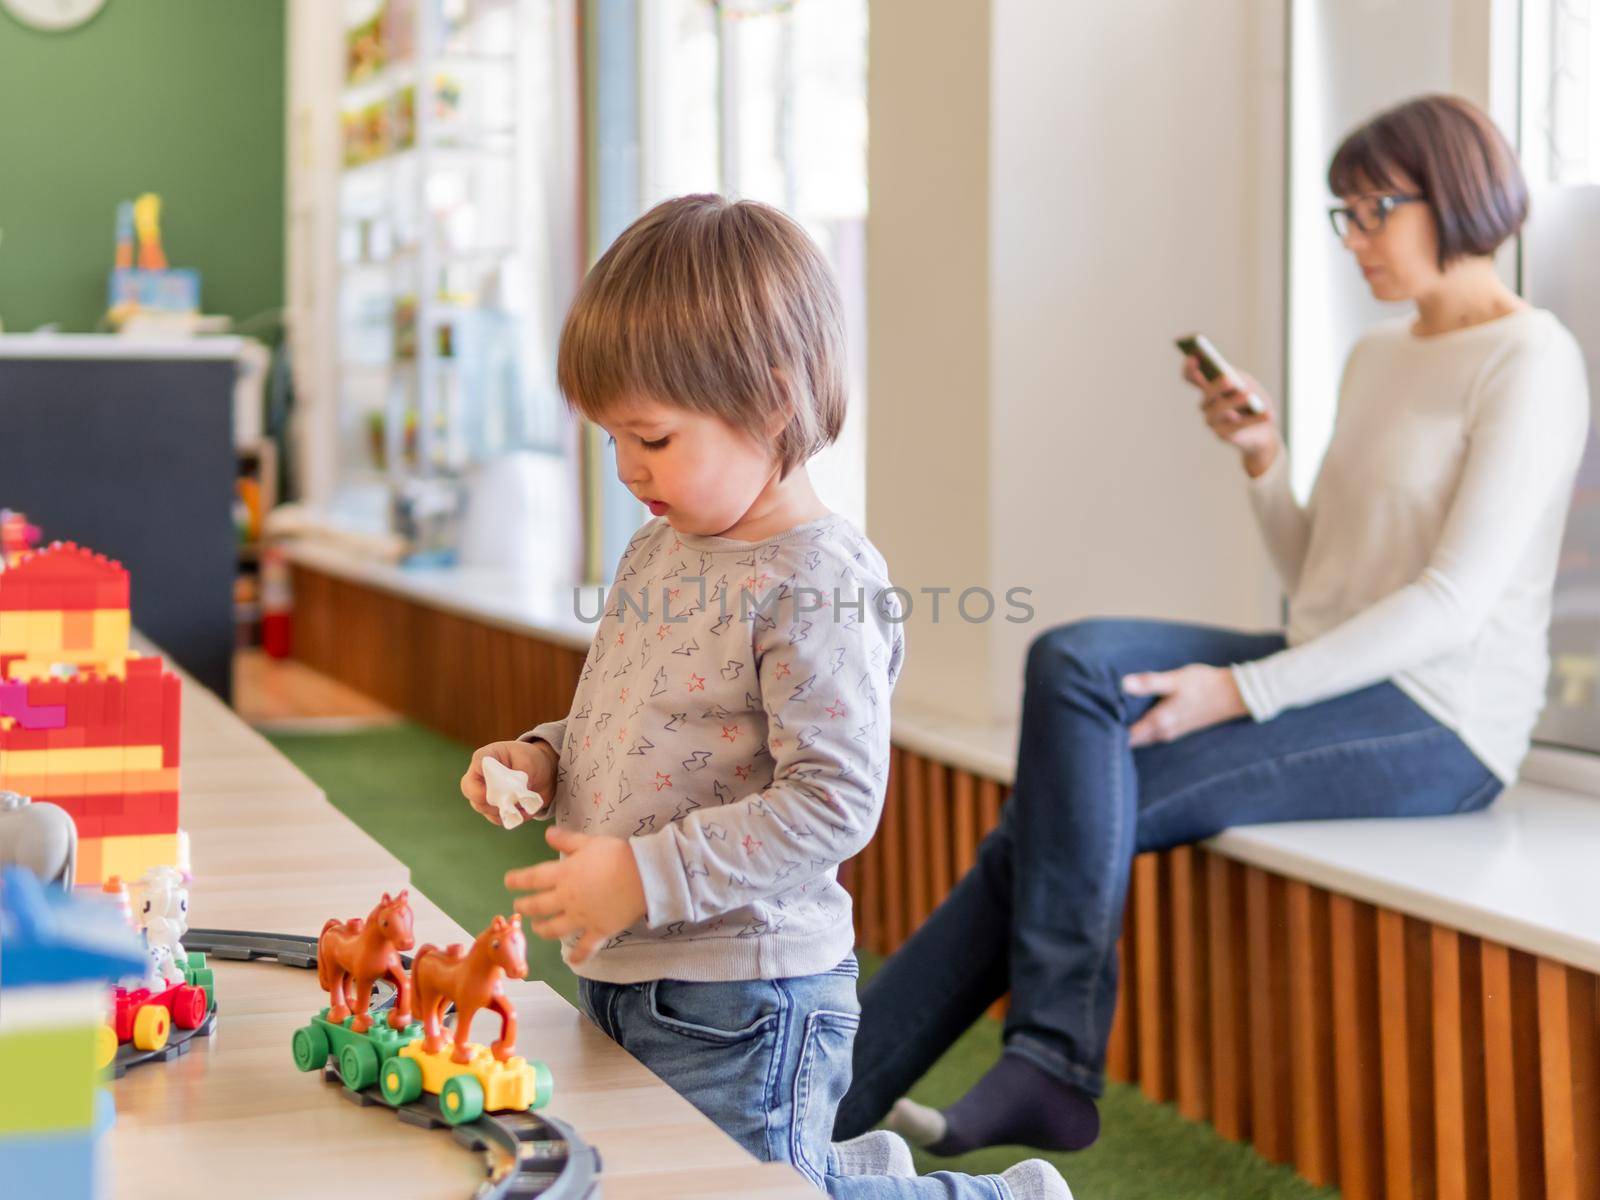 Toddler plays with colorful toy blocks while his mother or babysitter texting in smartphone. Little boy stares on toy constructor. Interior of kindergarten or nursery.